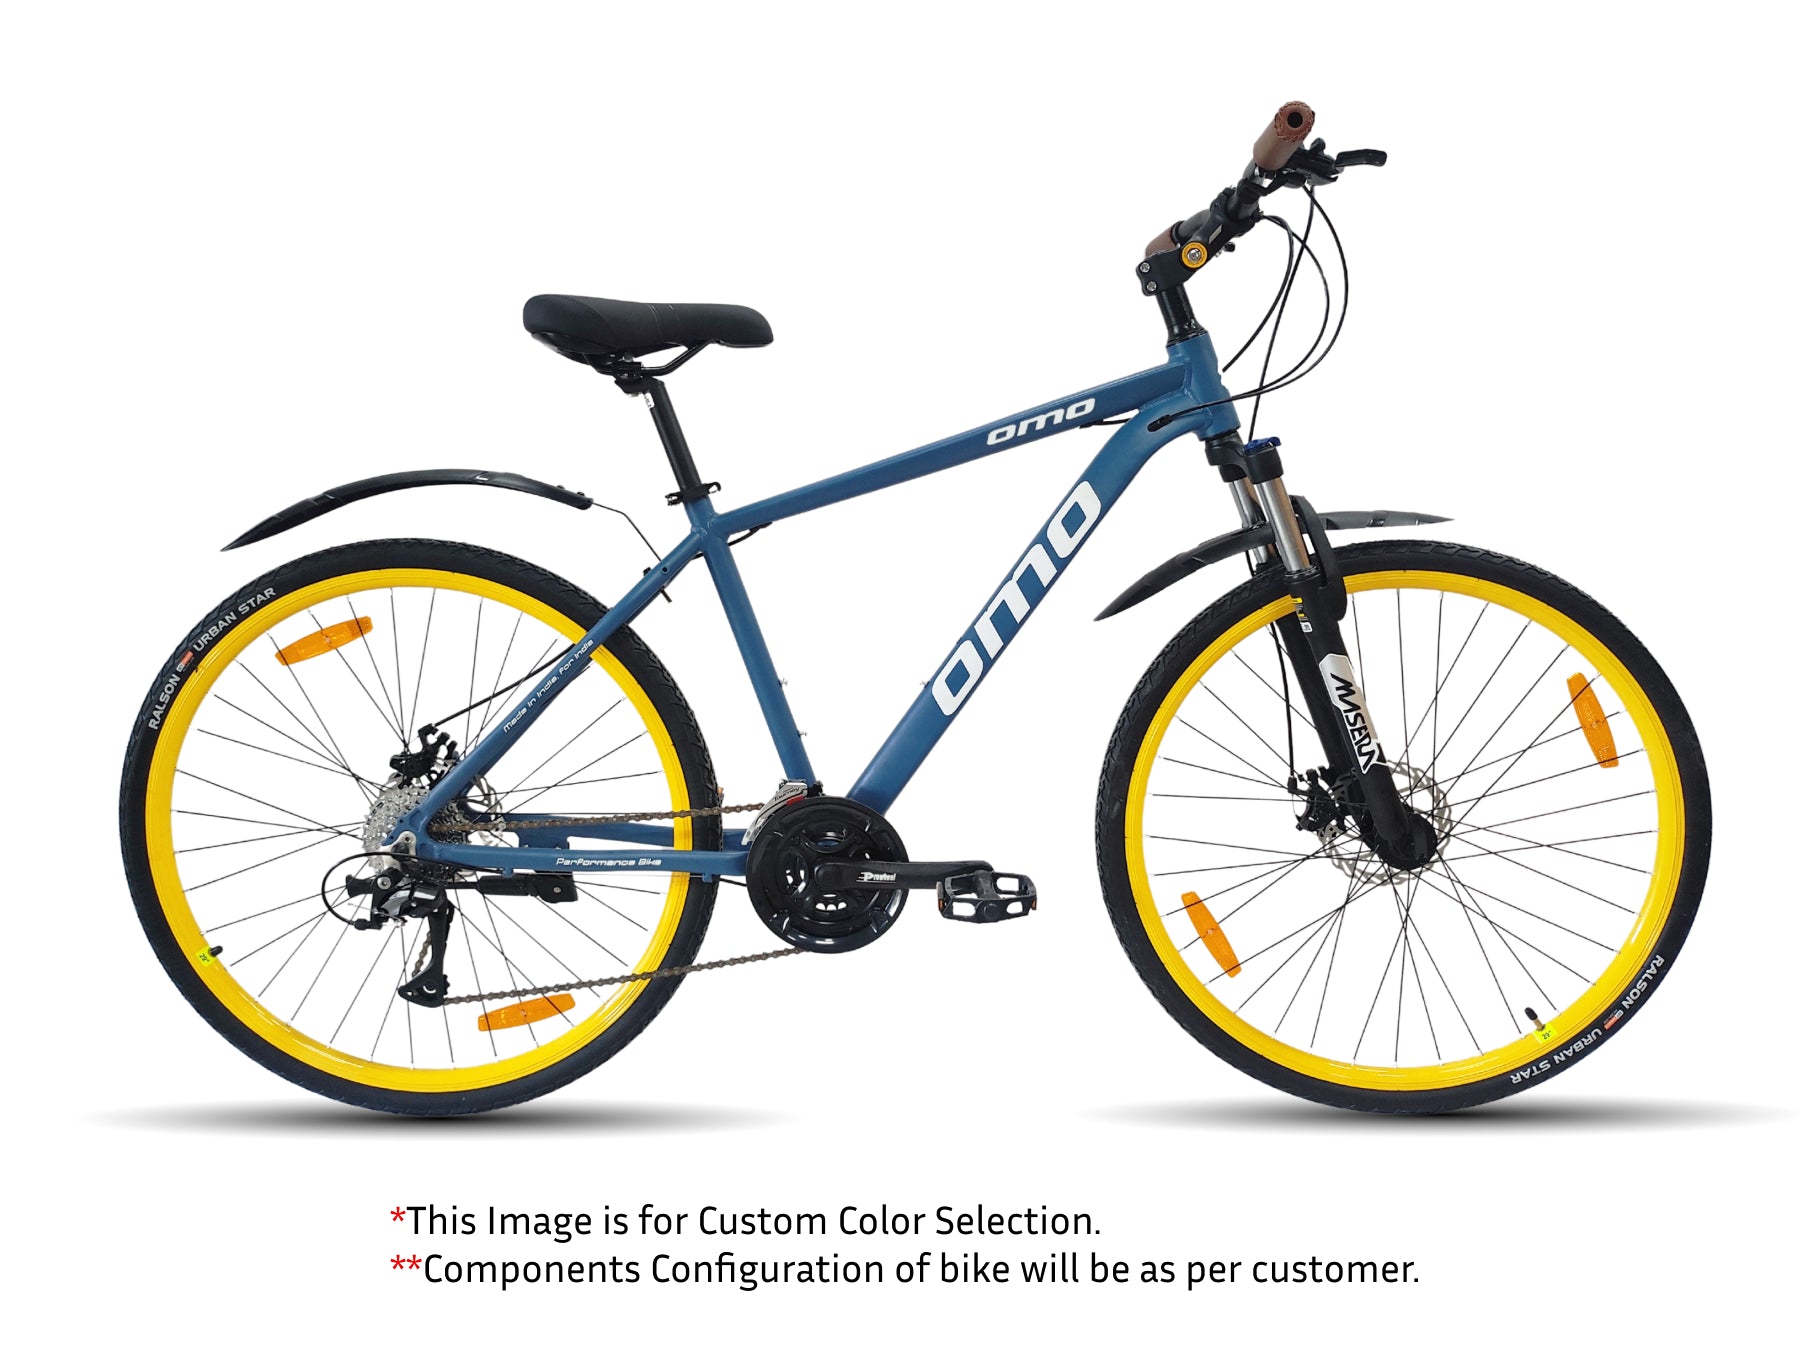 ALLOY HYBRID  24GEAR ZOOM 700C (29_) Blue  Yellow bestseller omobikes hybrid bicycle